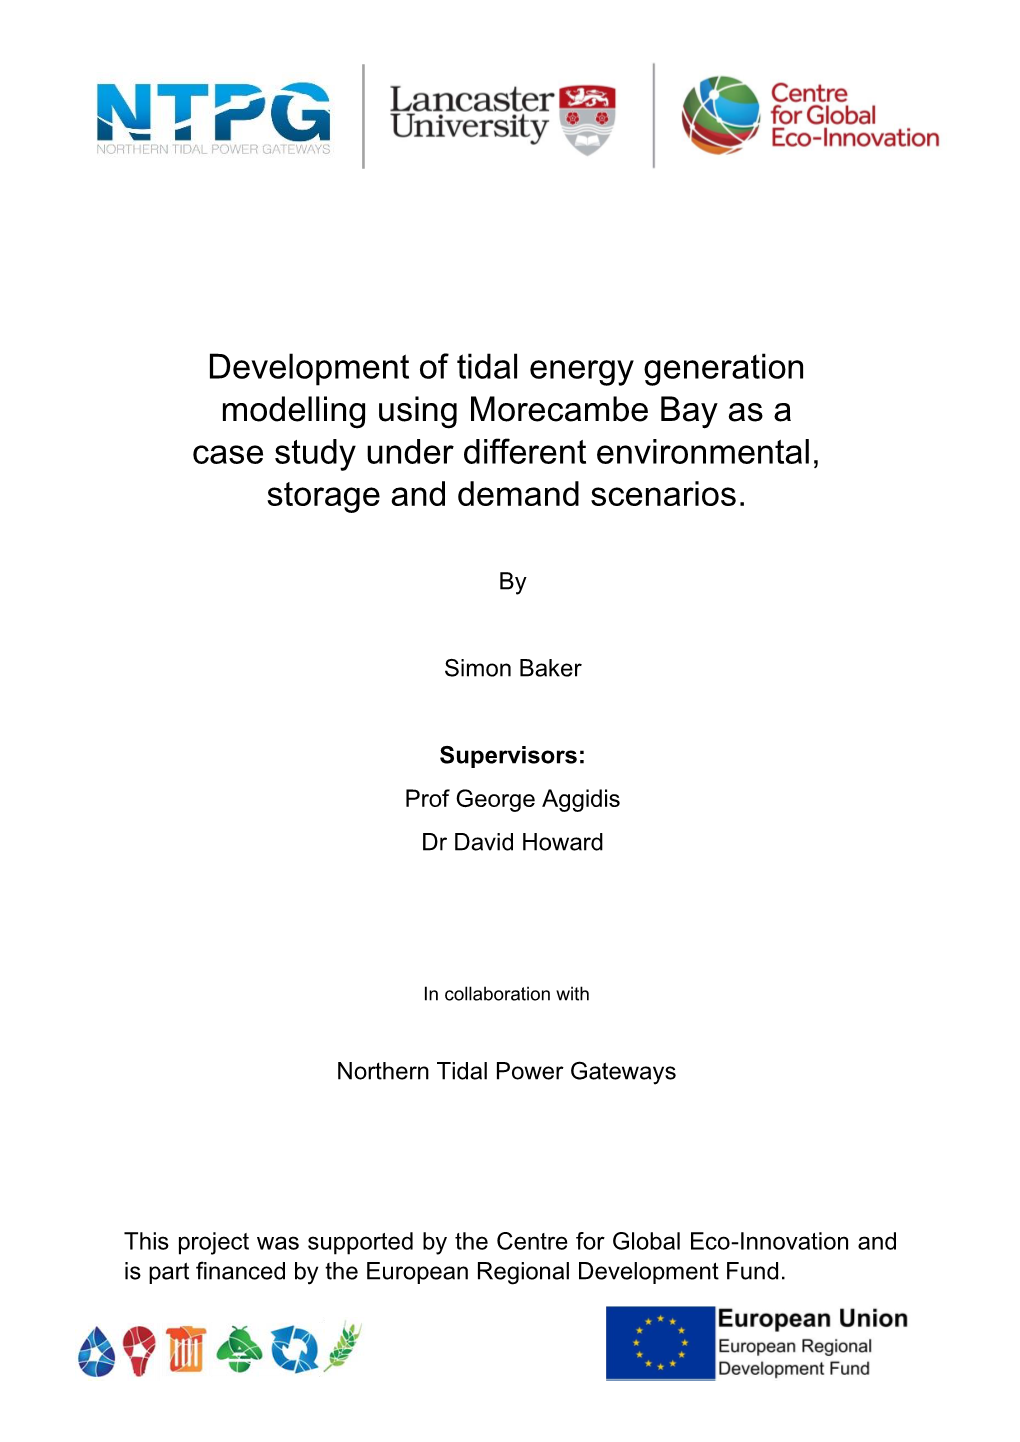 Development of Tidal Energy Generation Modelling Using Morecambe Bay As a Case Study Under Different Environmental, Storage and Demand Scenarios